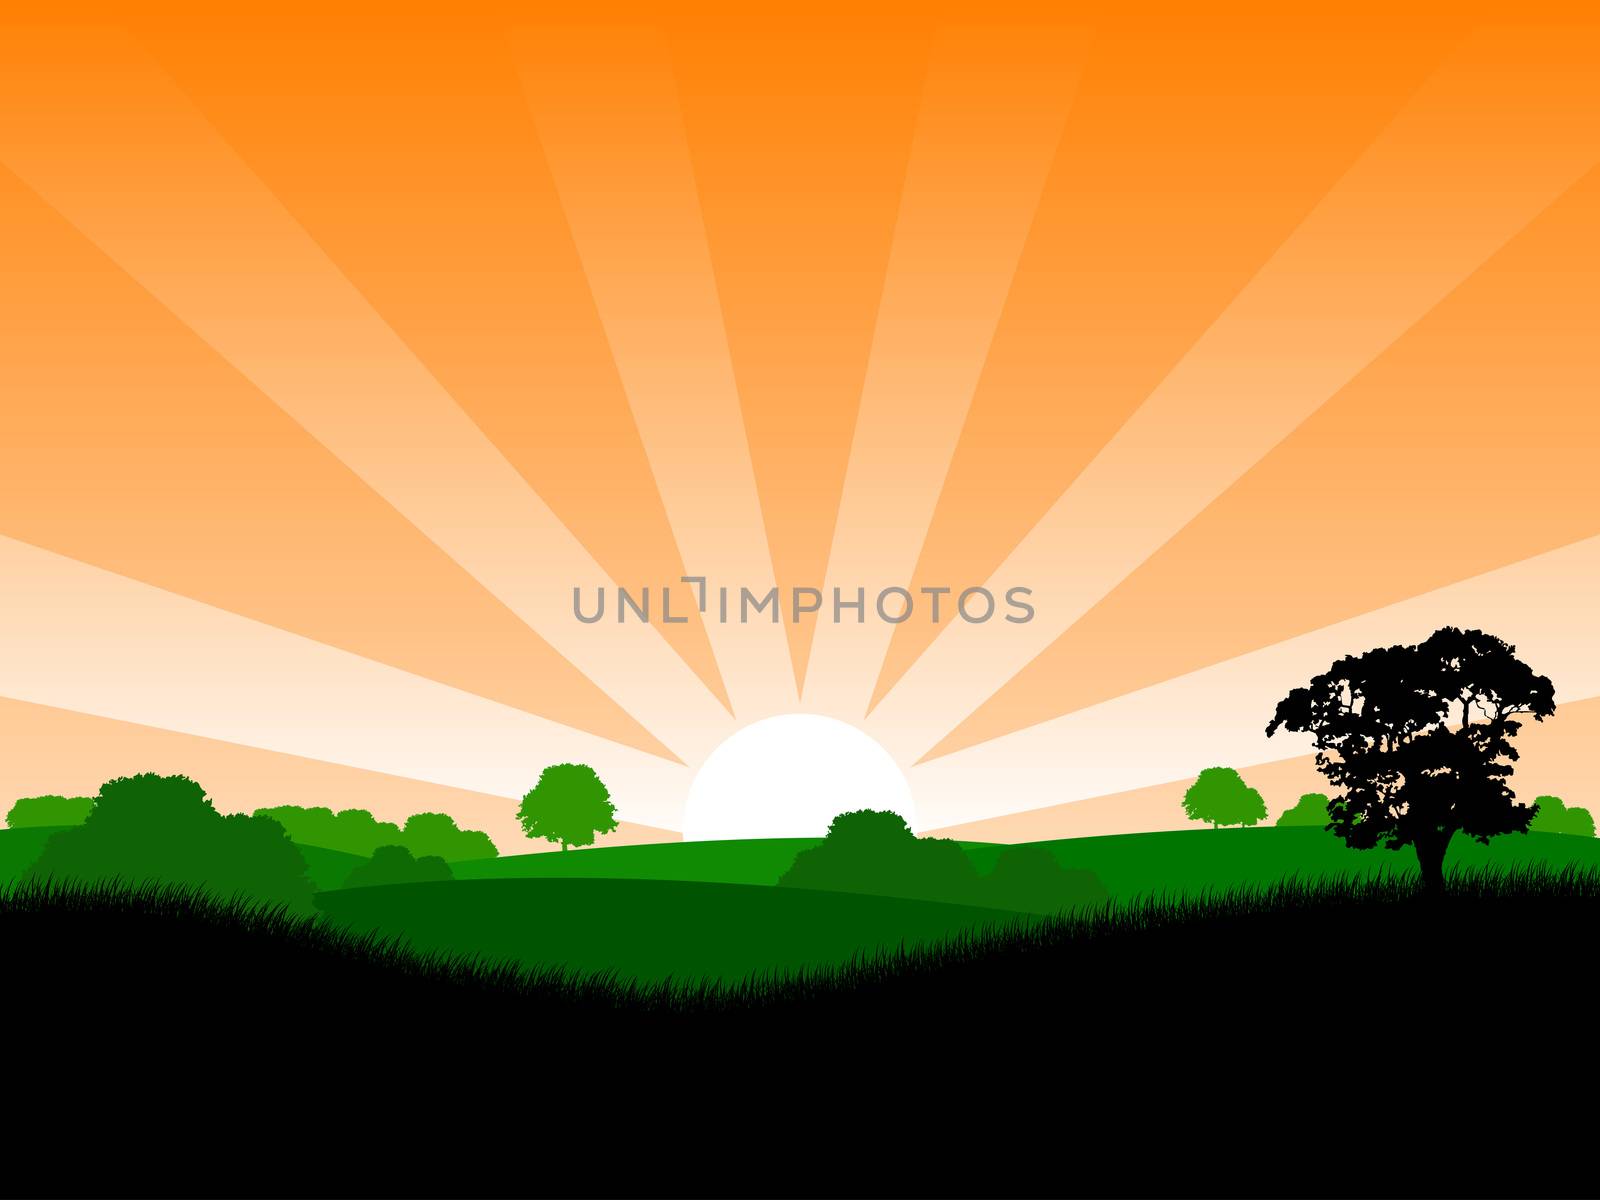 Summer sunrise landscape with trees and grass vector illustration